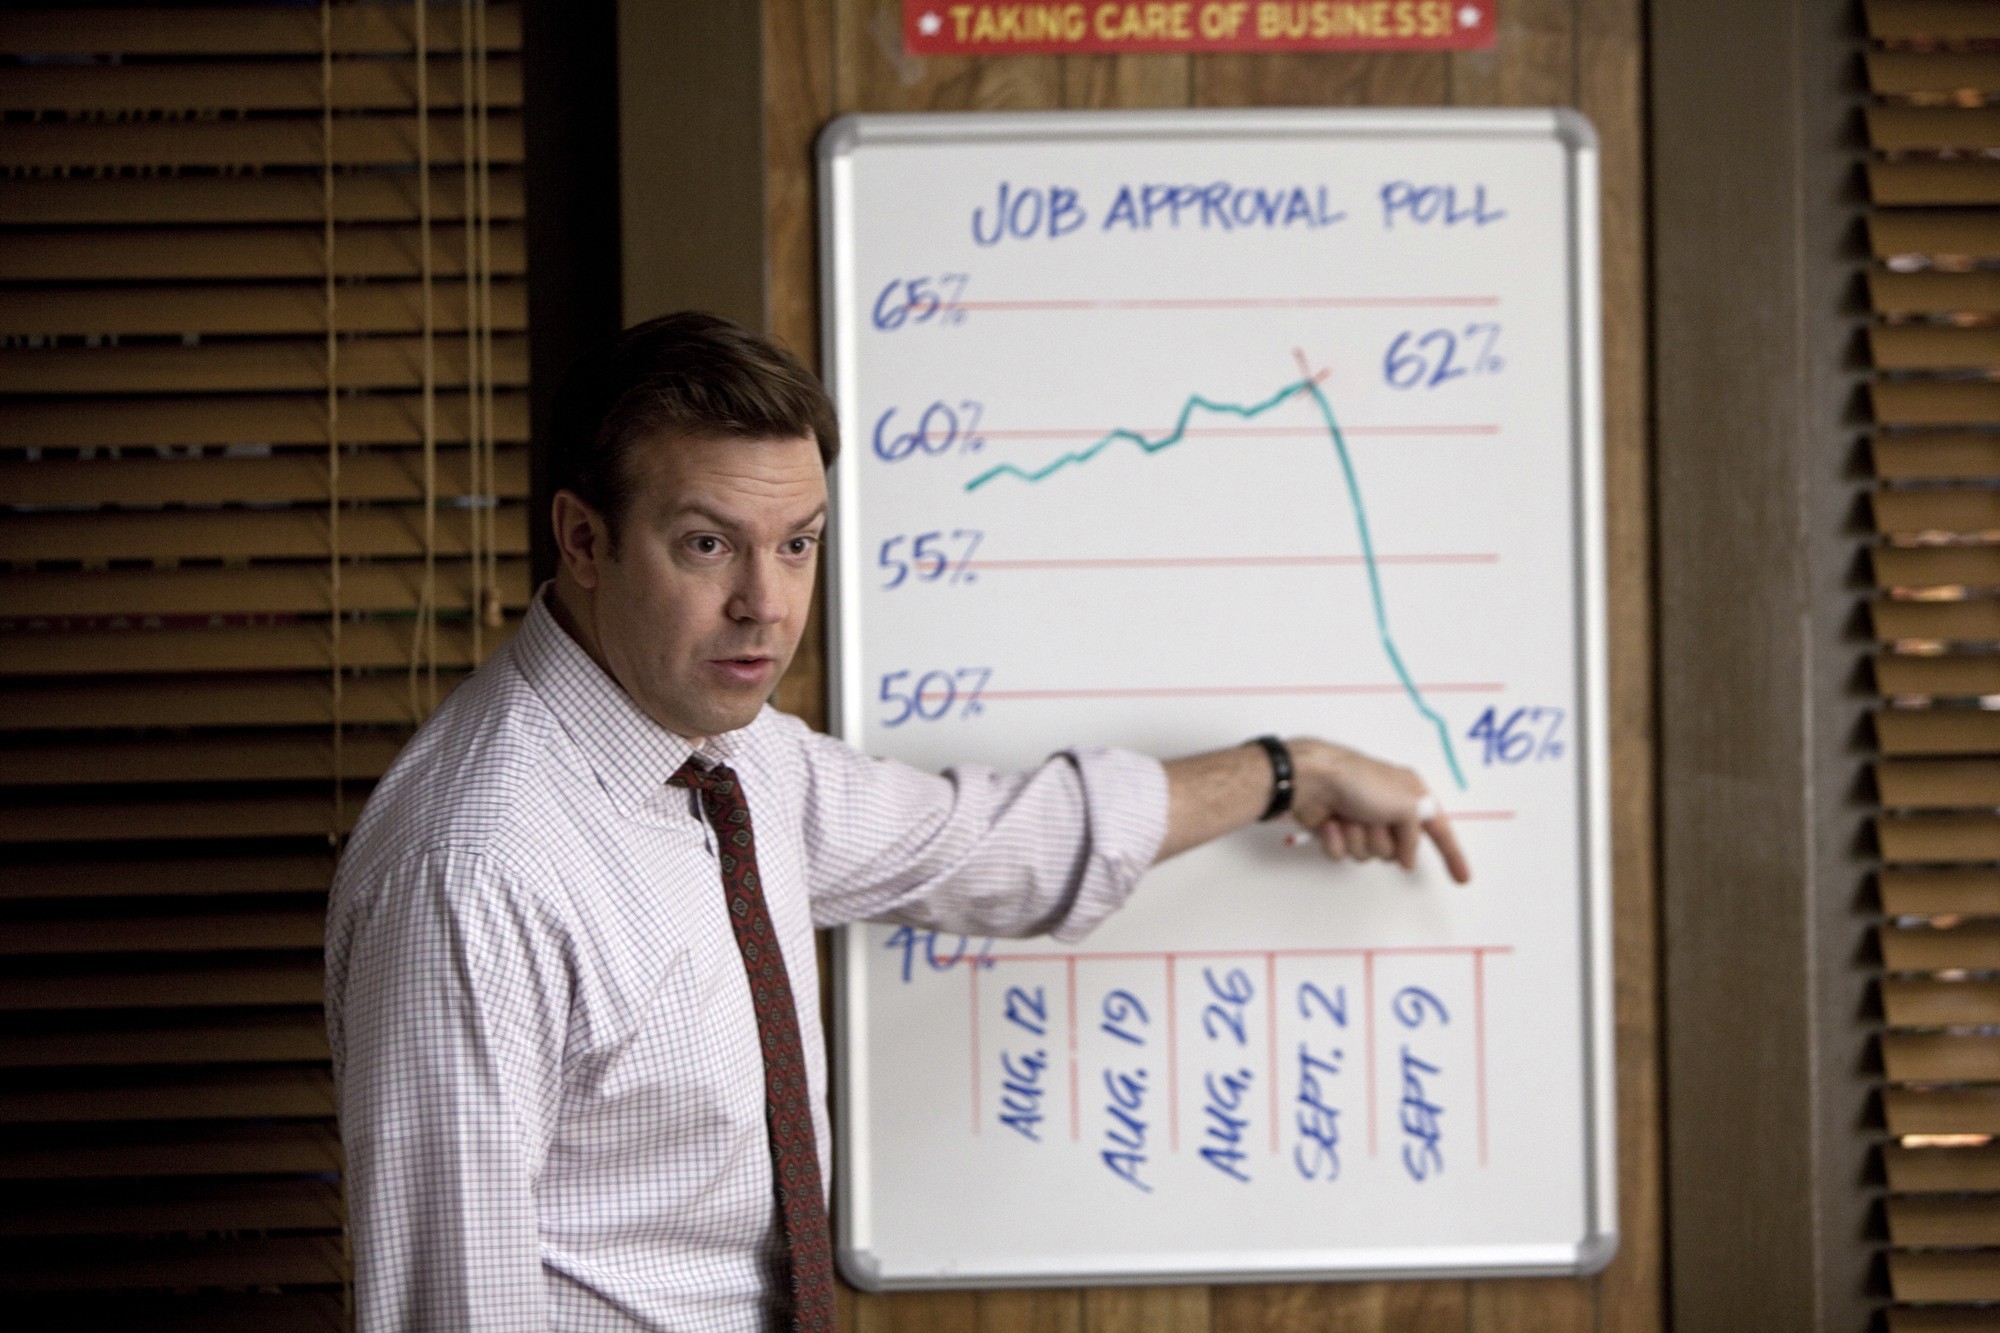 Jason Sudeikis stars as Mitch in Warner Bros. Pictures' The Campaign (2012)